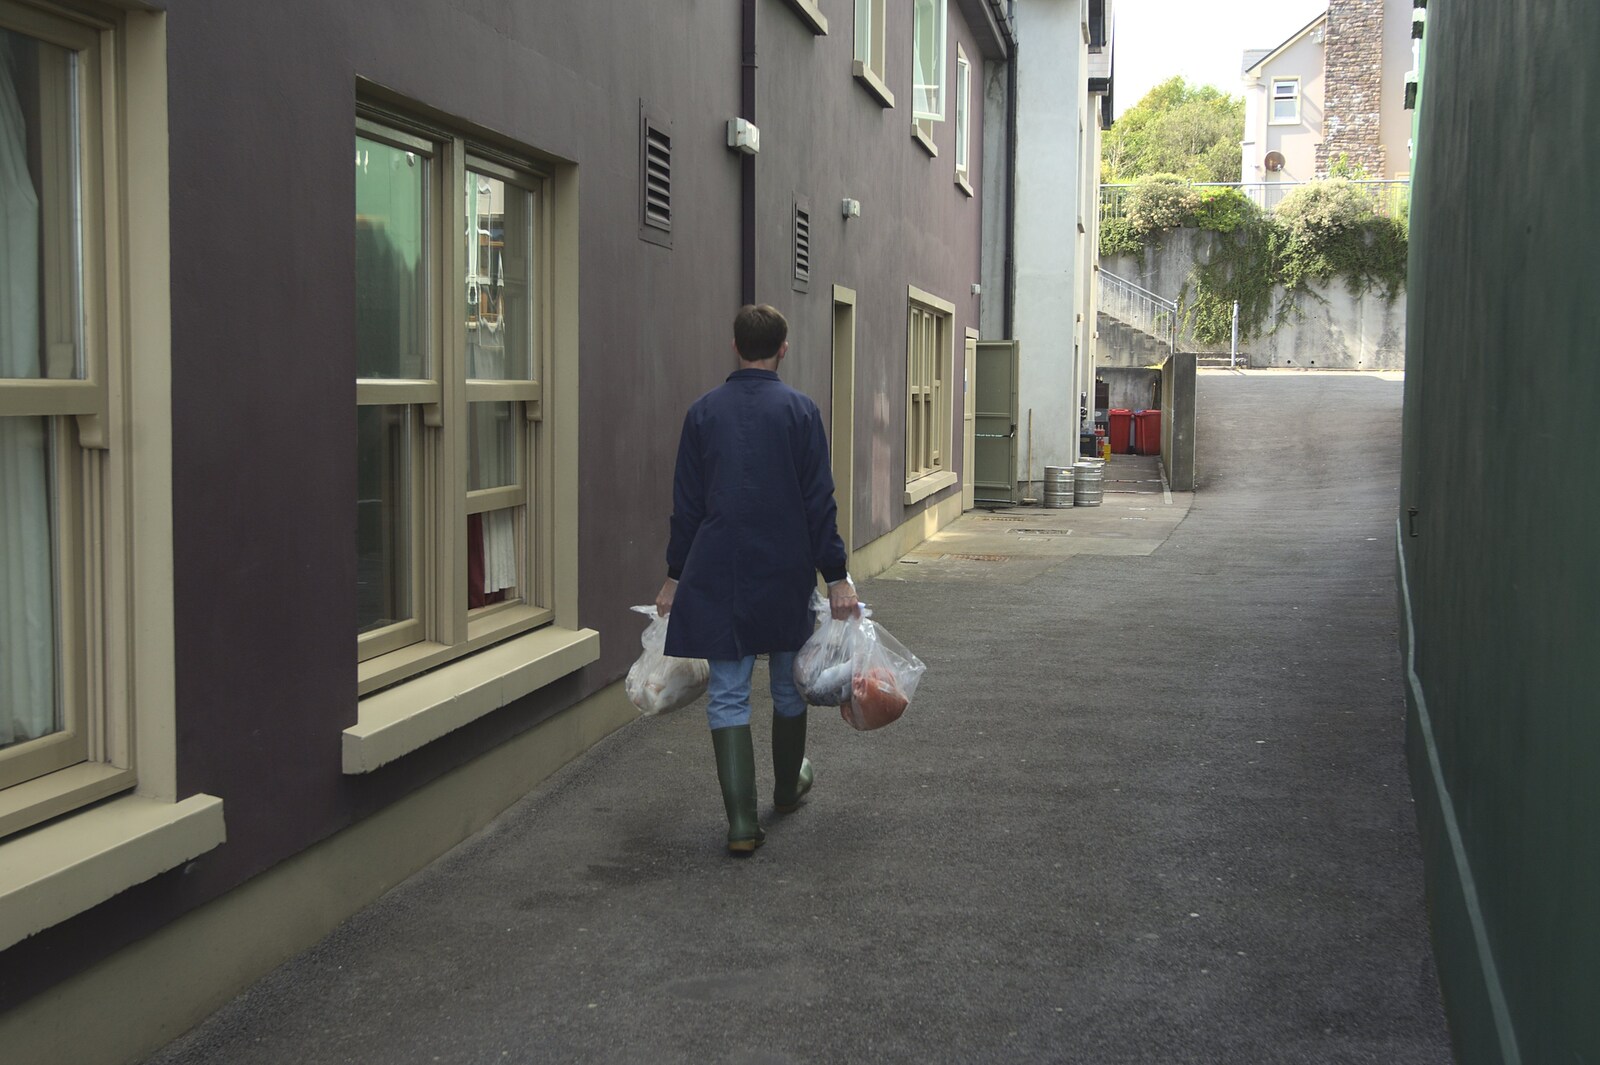 Some dude carries bags of fish round the back streets from A Trip to Dingle, County Kerry, Ireland - 21st July 2009